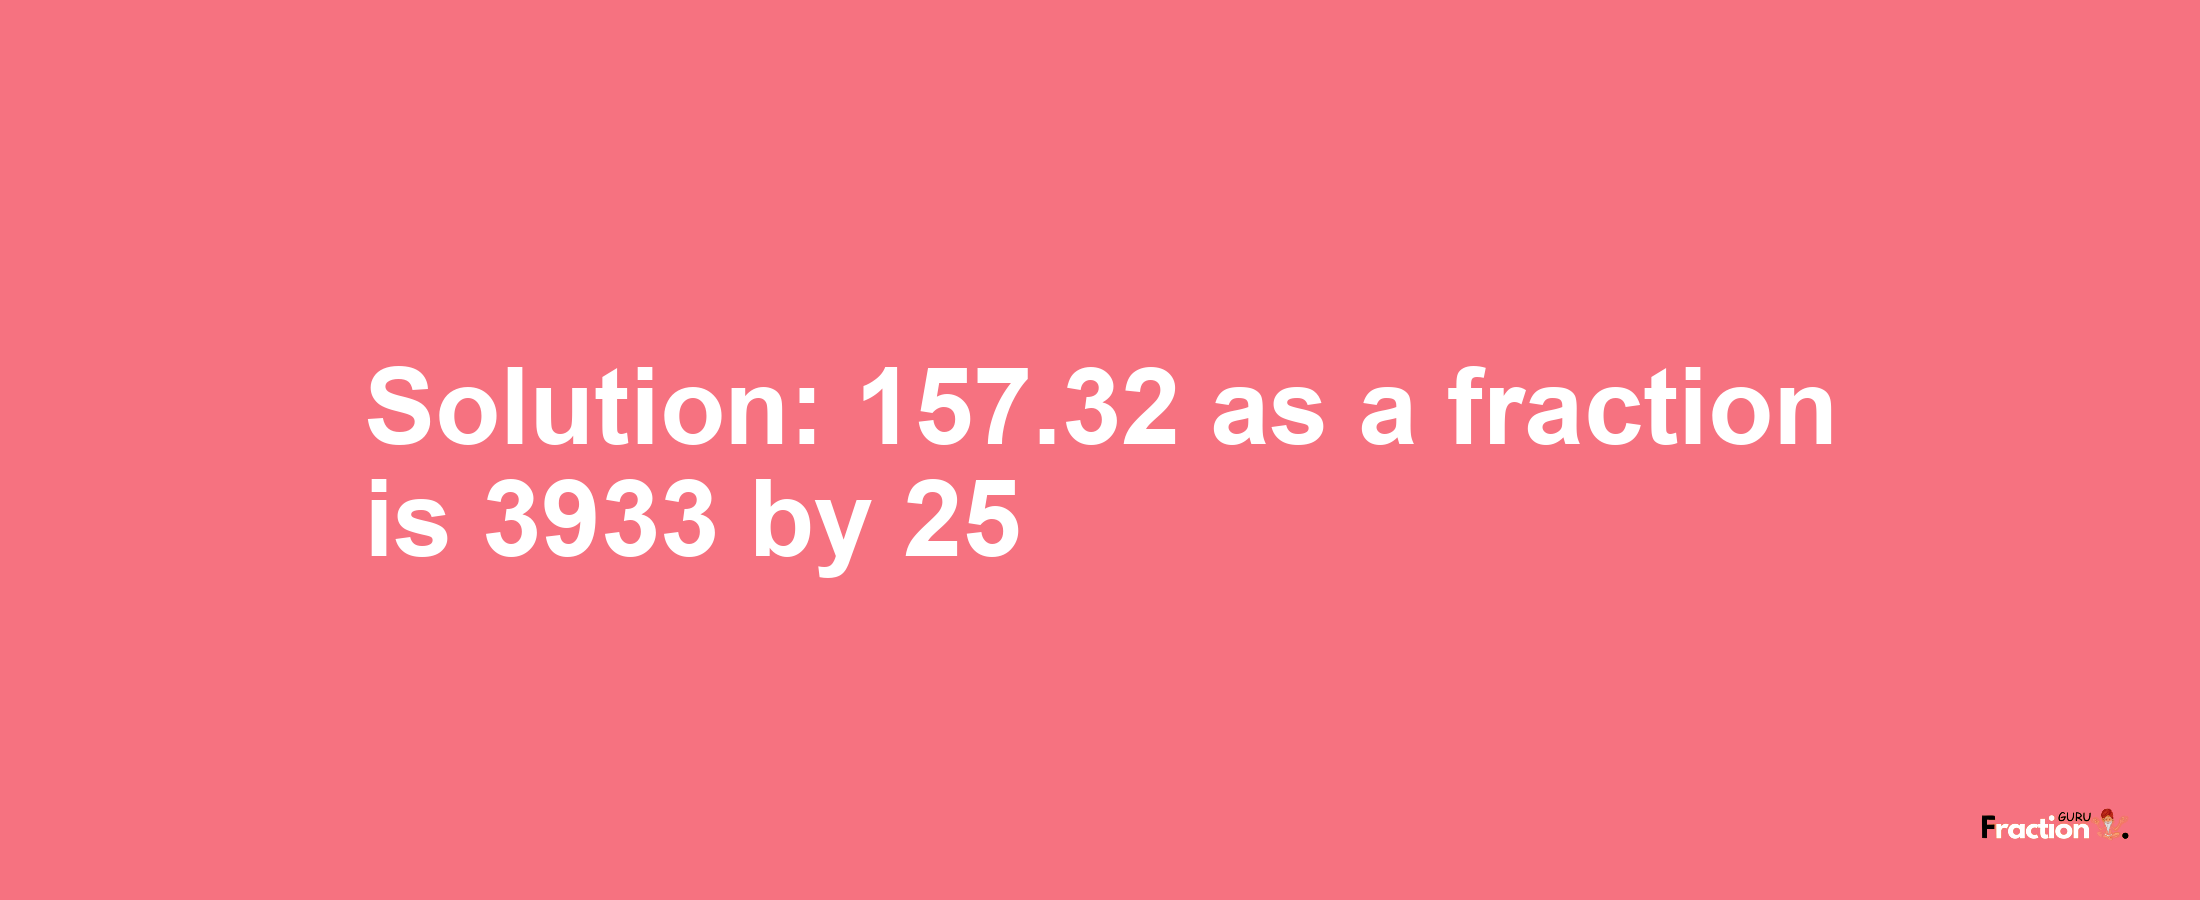 Solution:157.32 as a fraction is 3933/25